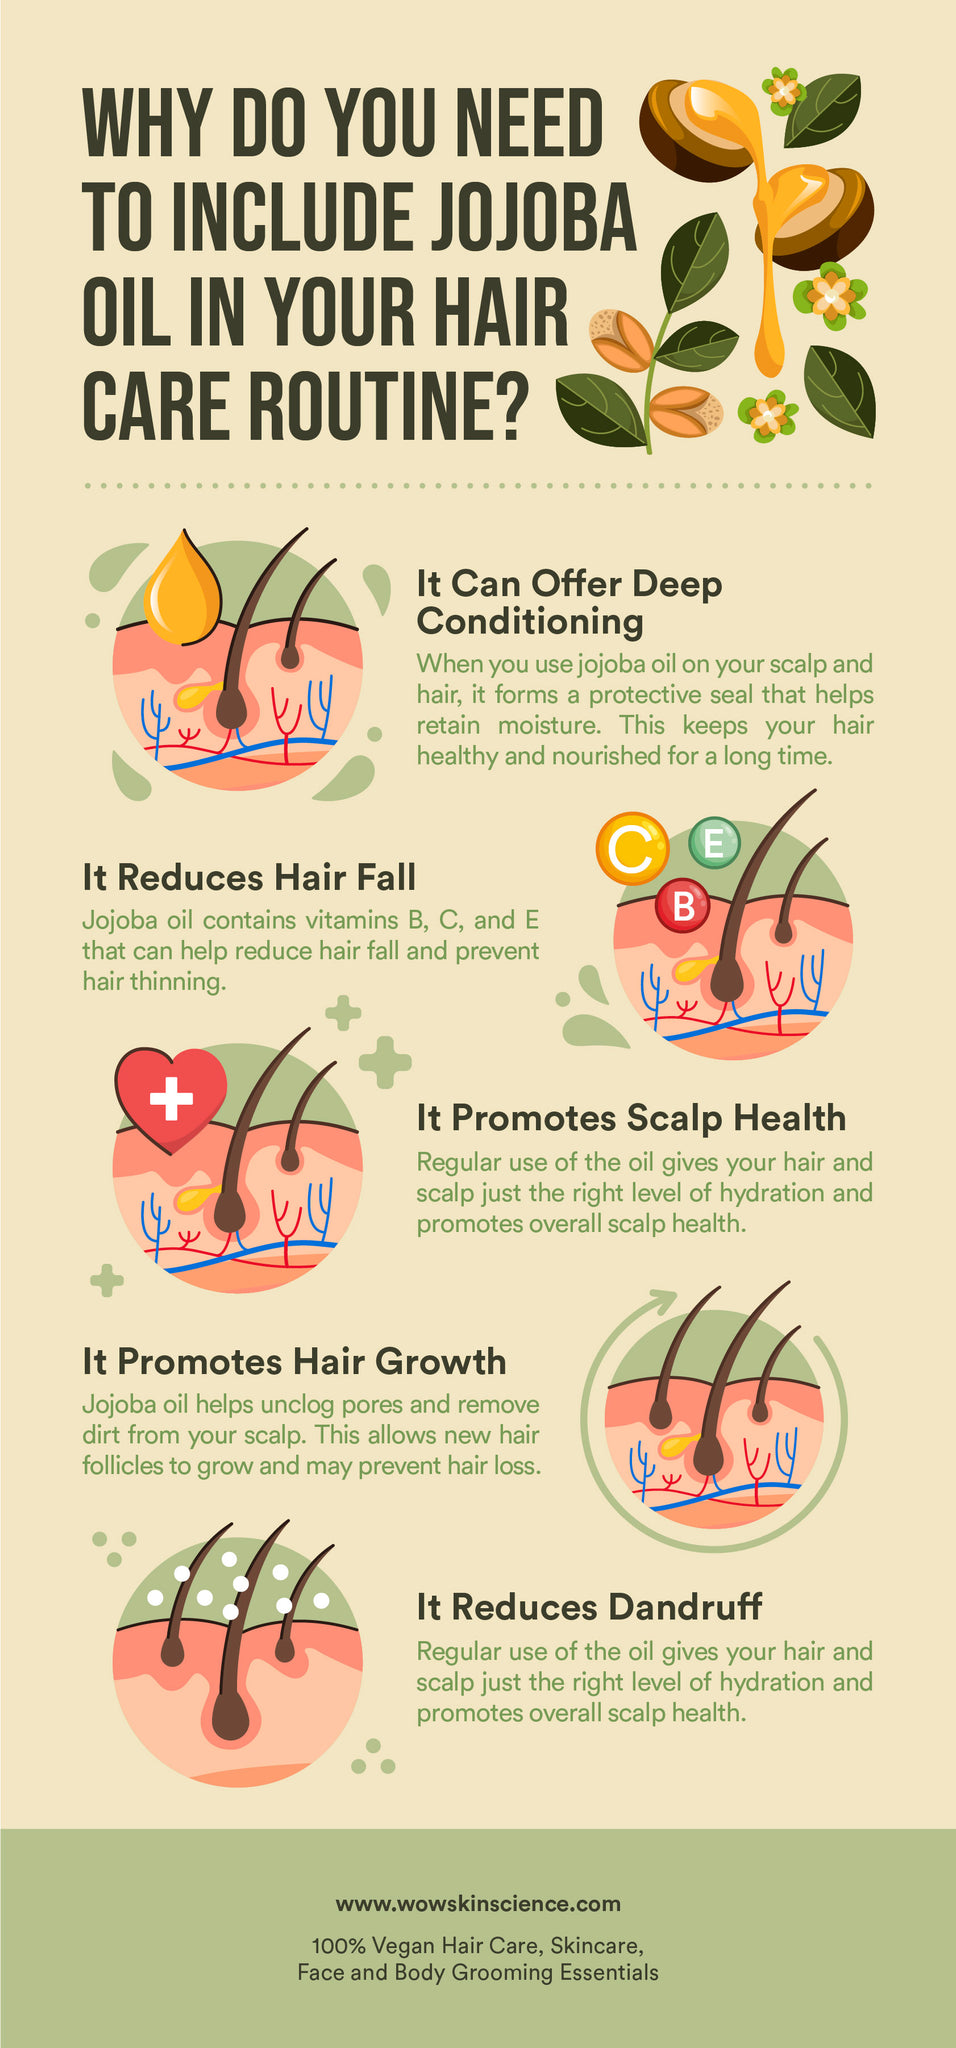 What are some jojoba oil benefits for hair?